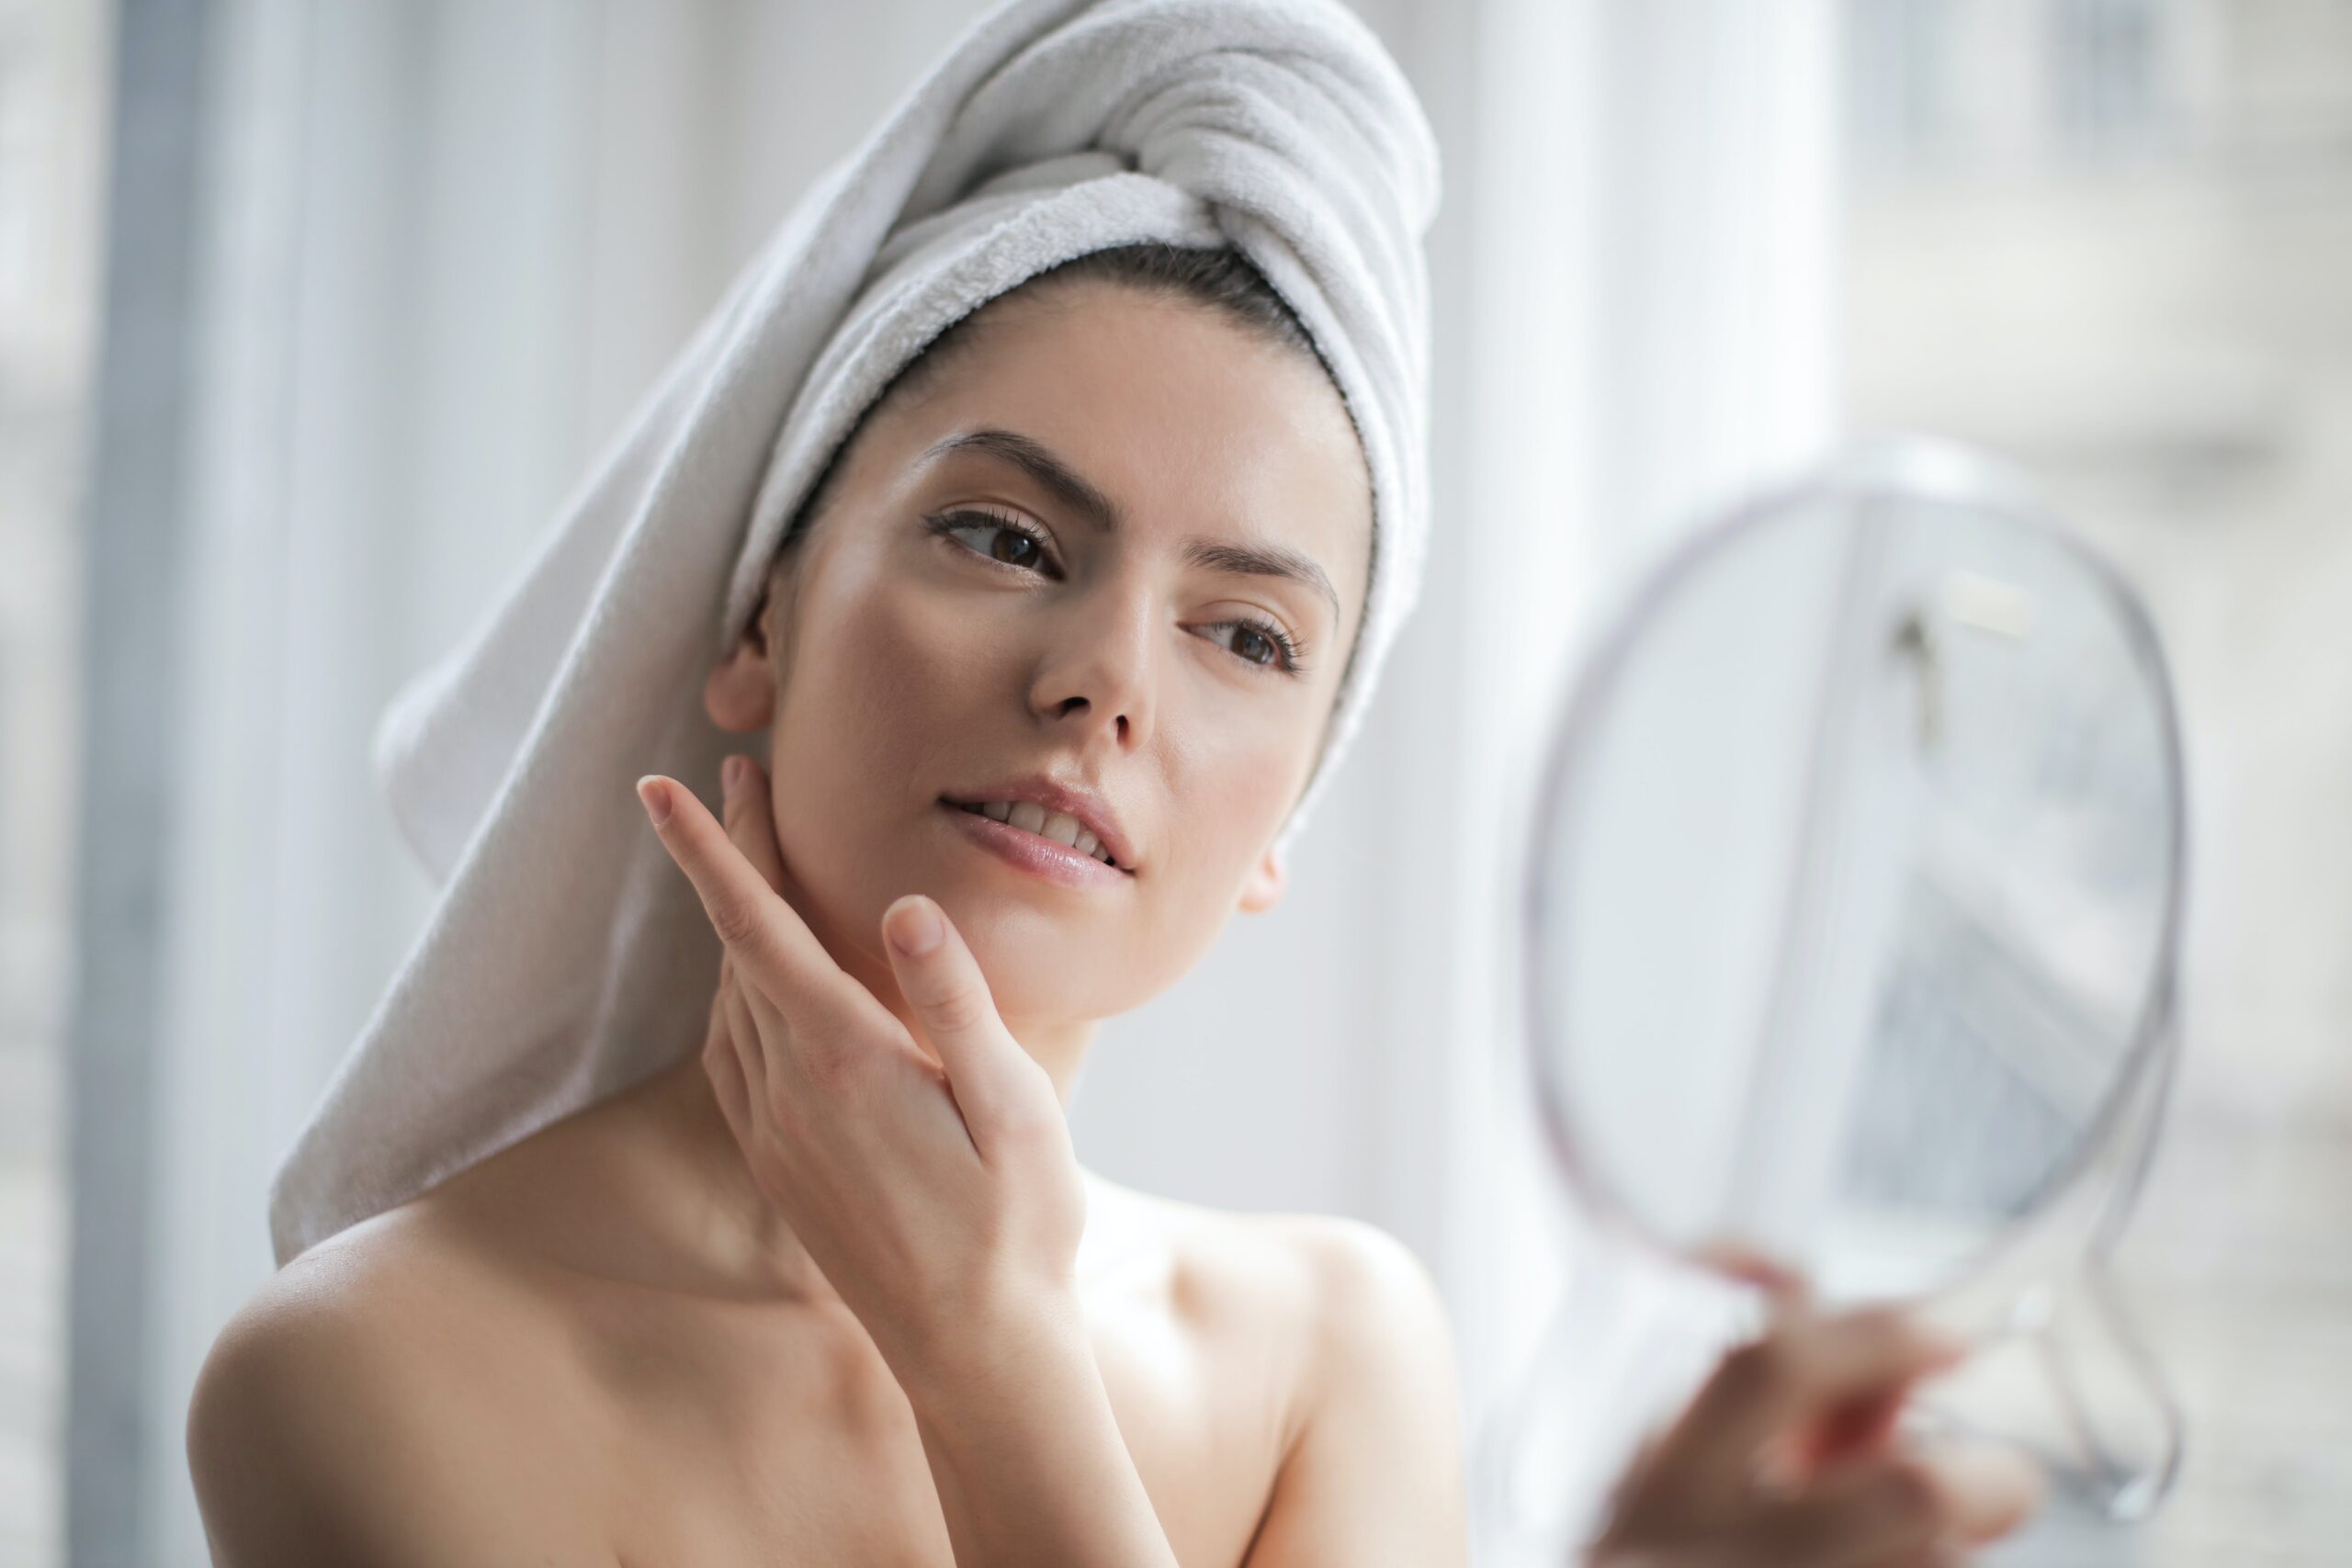 woman with towel on hair looking in handheld mirror touching face